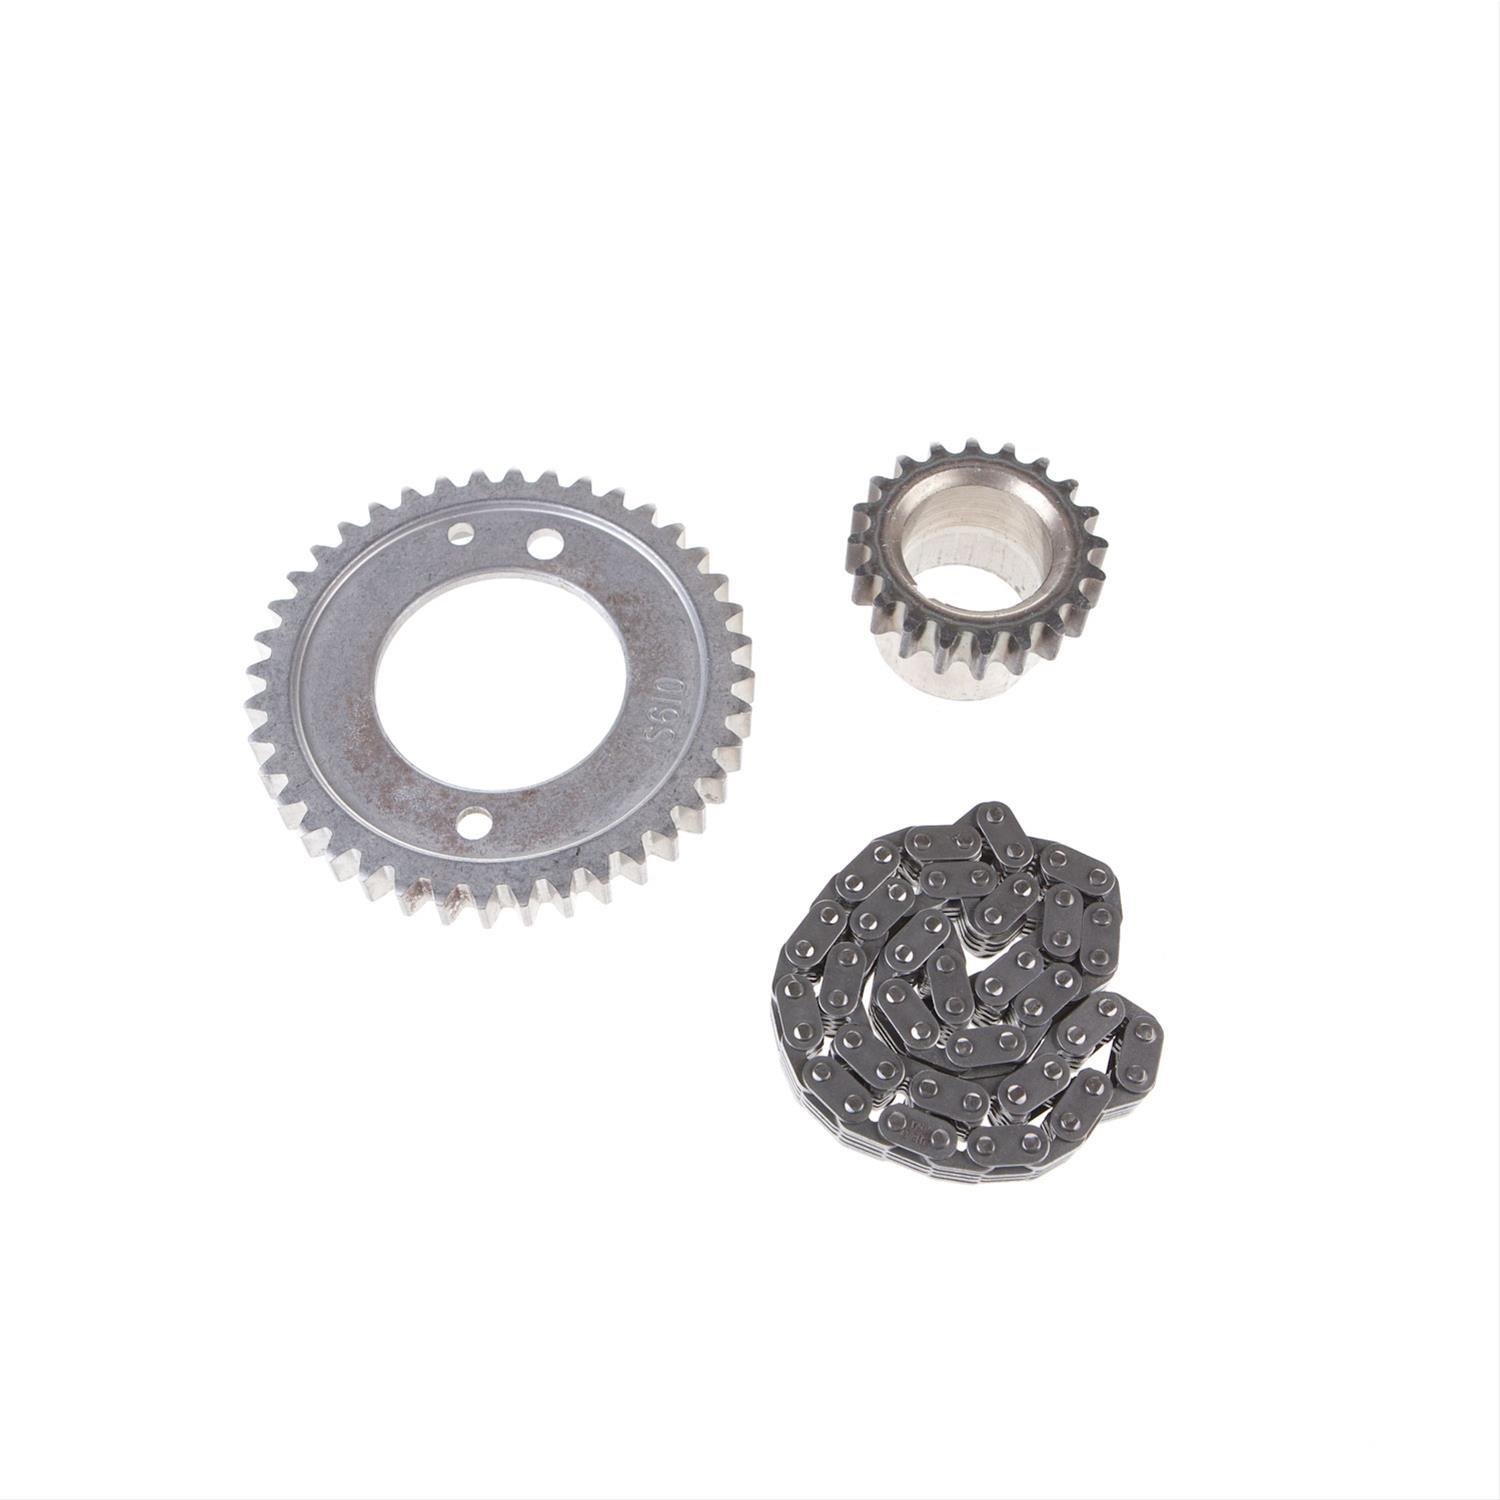 Engine Timing Chain Kit for 1985-1988 GM 3.0L, 3.8L Engines